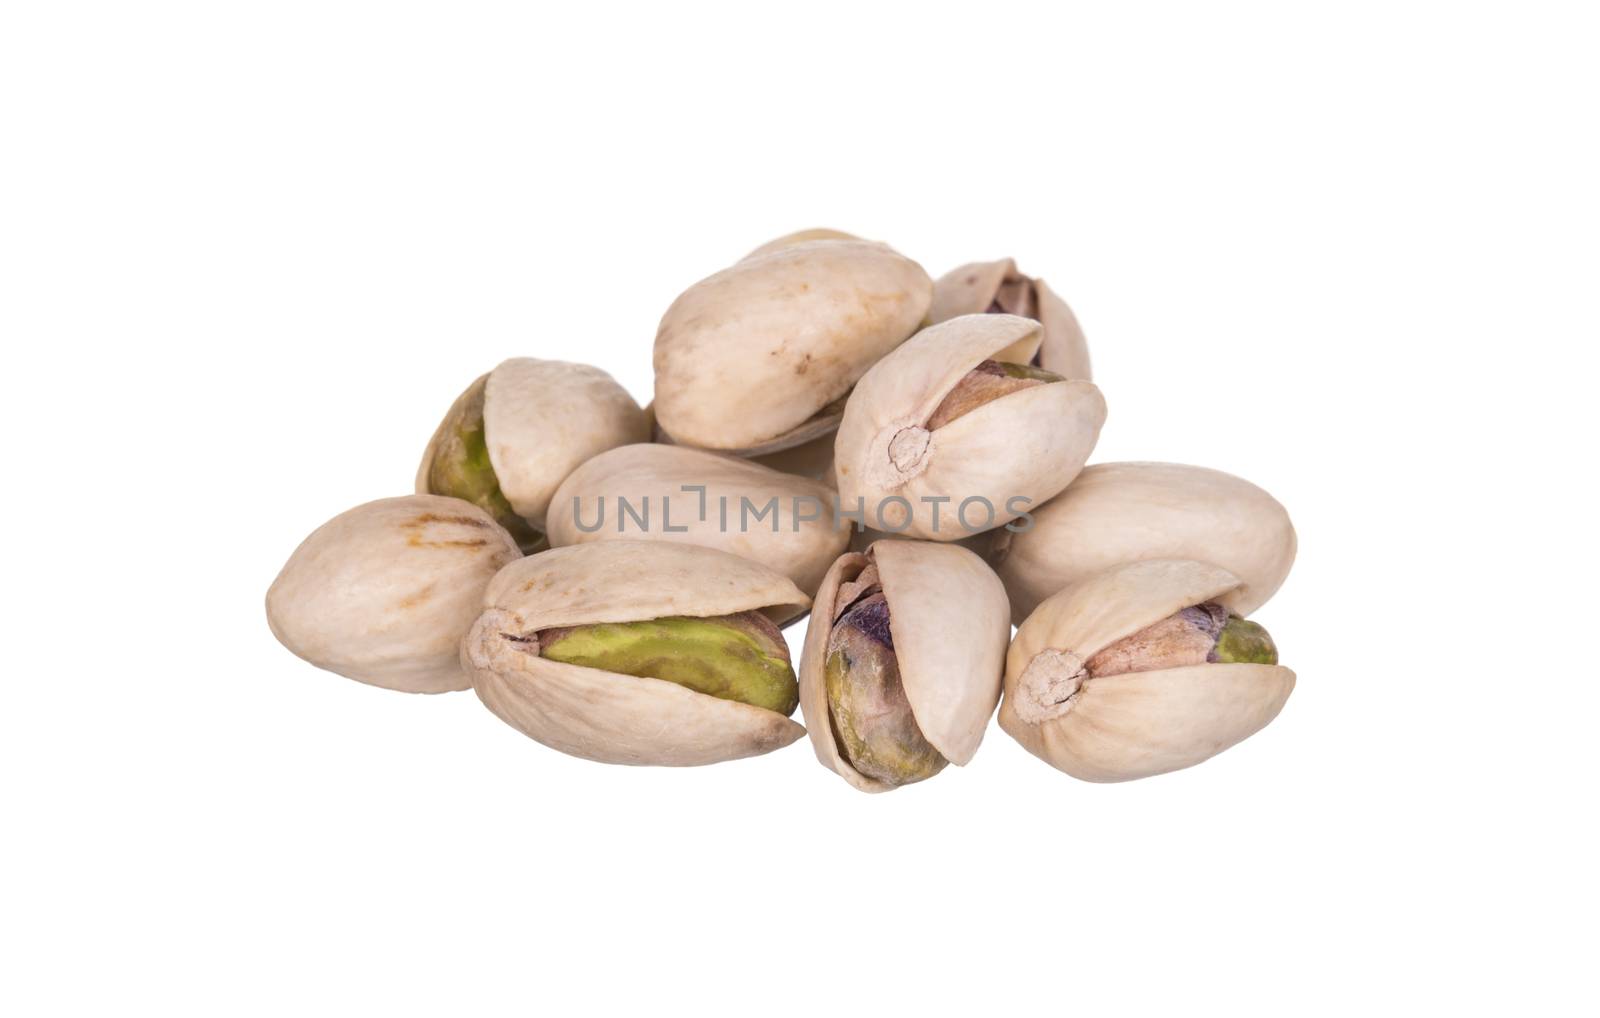 Pistachio nuts isolated on a white background.